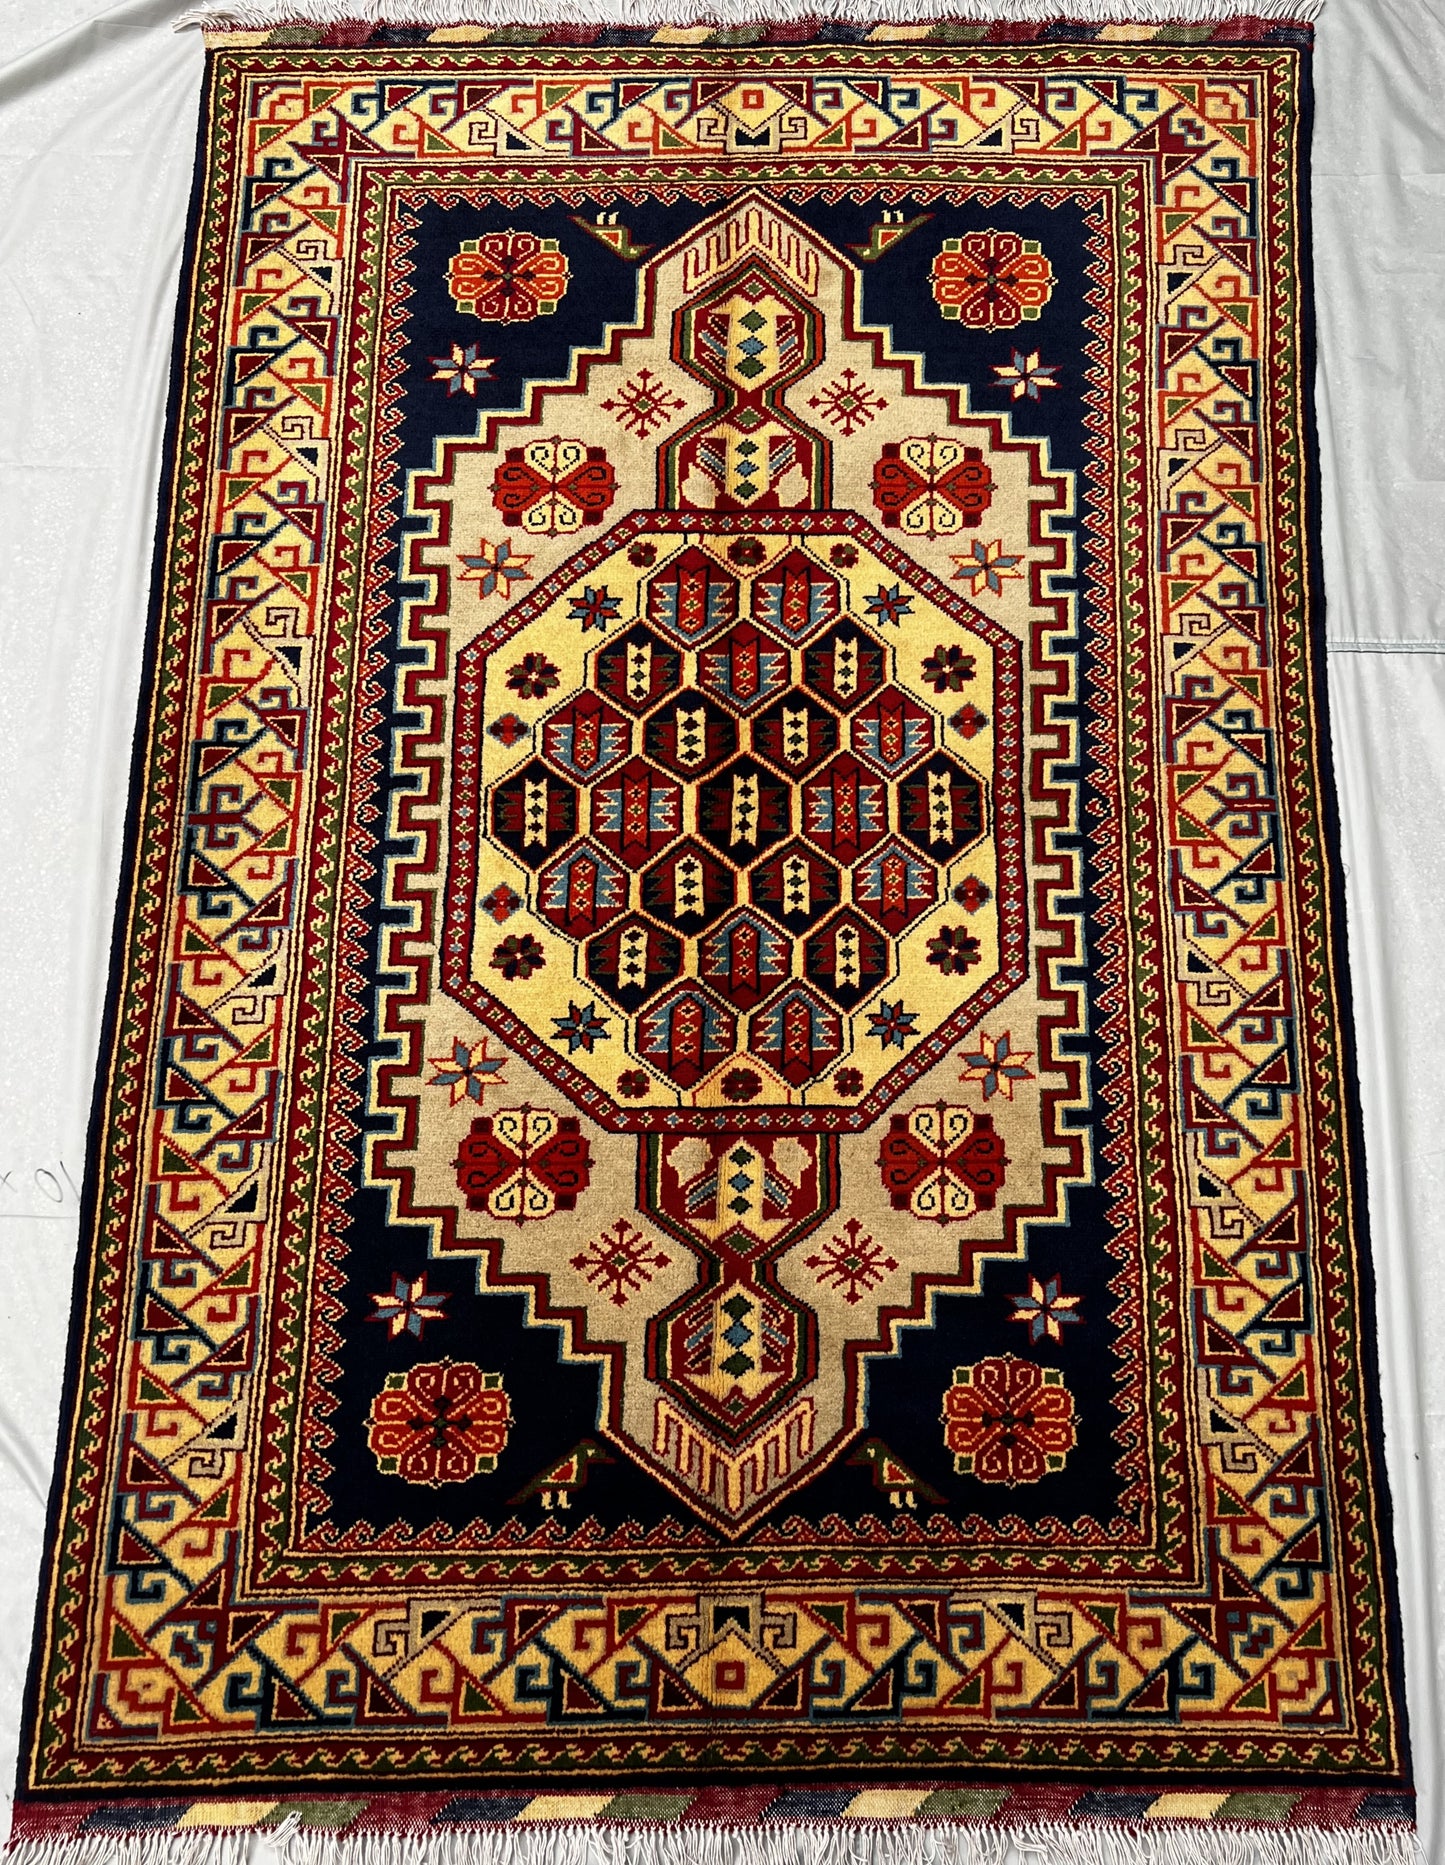 Afghan Hand Knotted/ Knitted Living Room/Dining Room Chob Rang Area Rug 4.6ftx3.2ft (CH-M-4X3-Y/DB-N) (Mazar-e-sharif) - Kabul Rugs